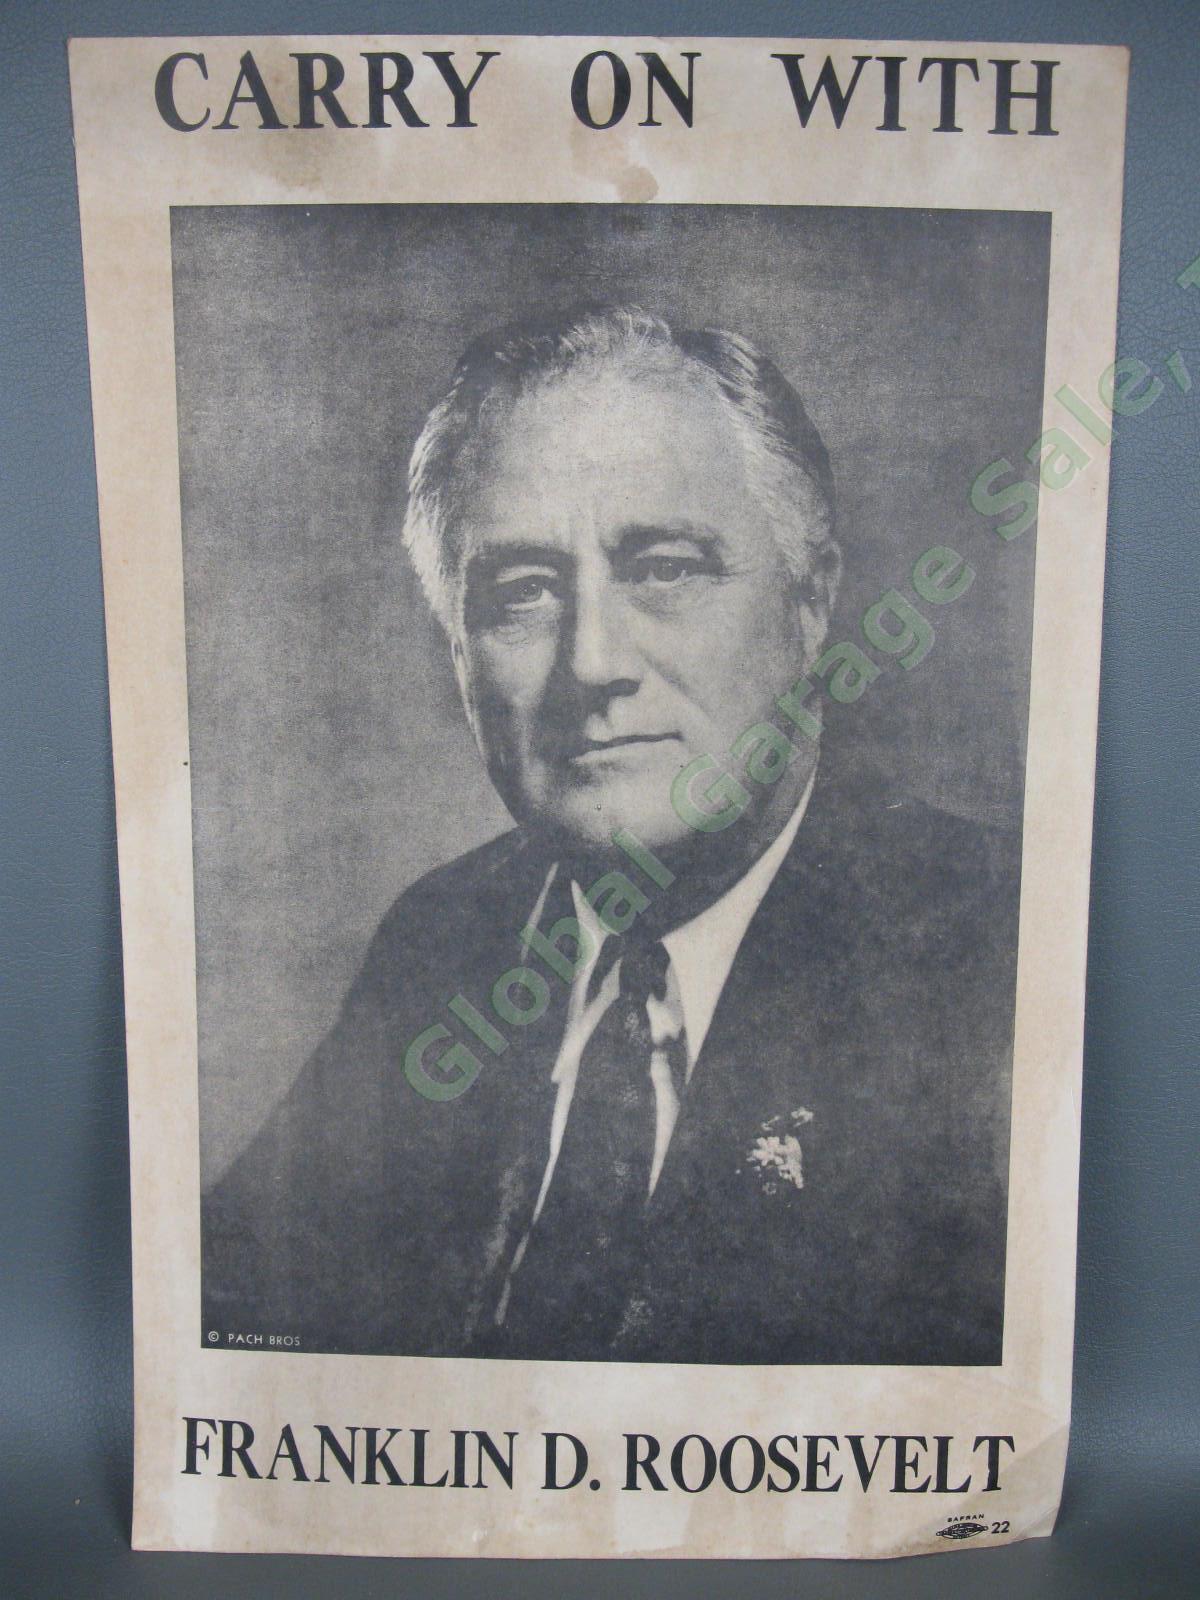 ORIGINAL 1936 President Campaign Poster CARRY ON WITH Franklin D Roosevelt FDR